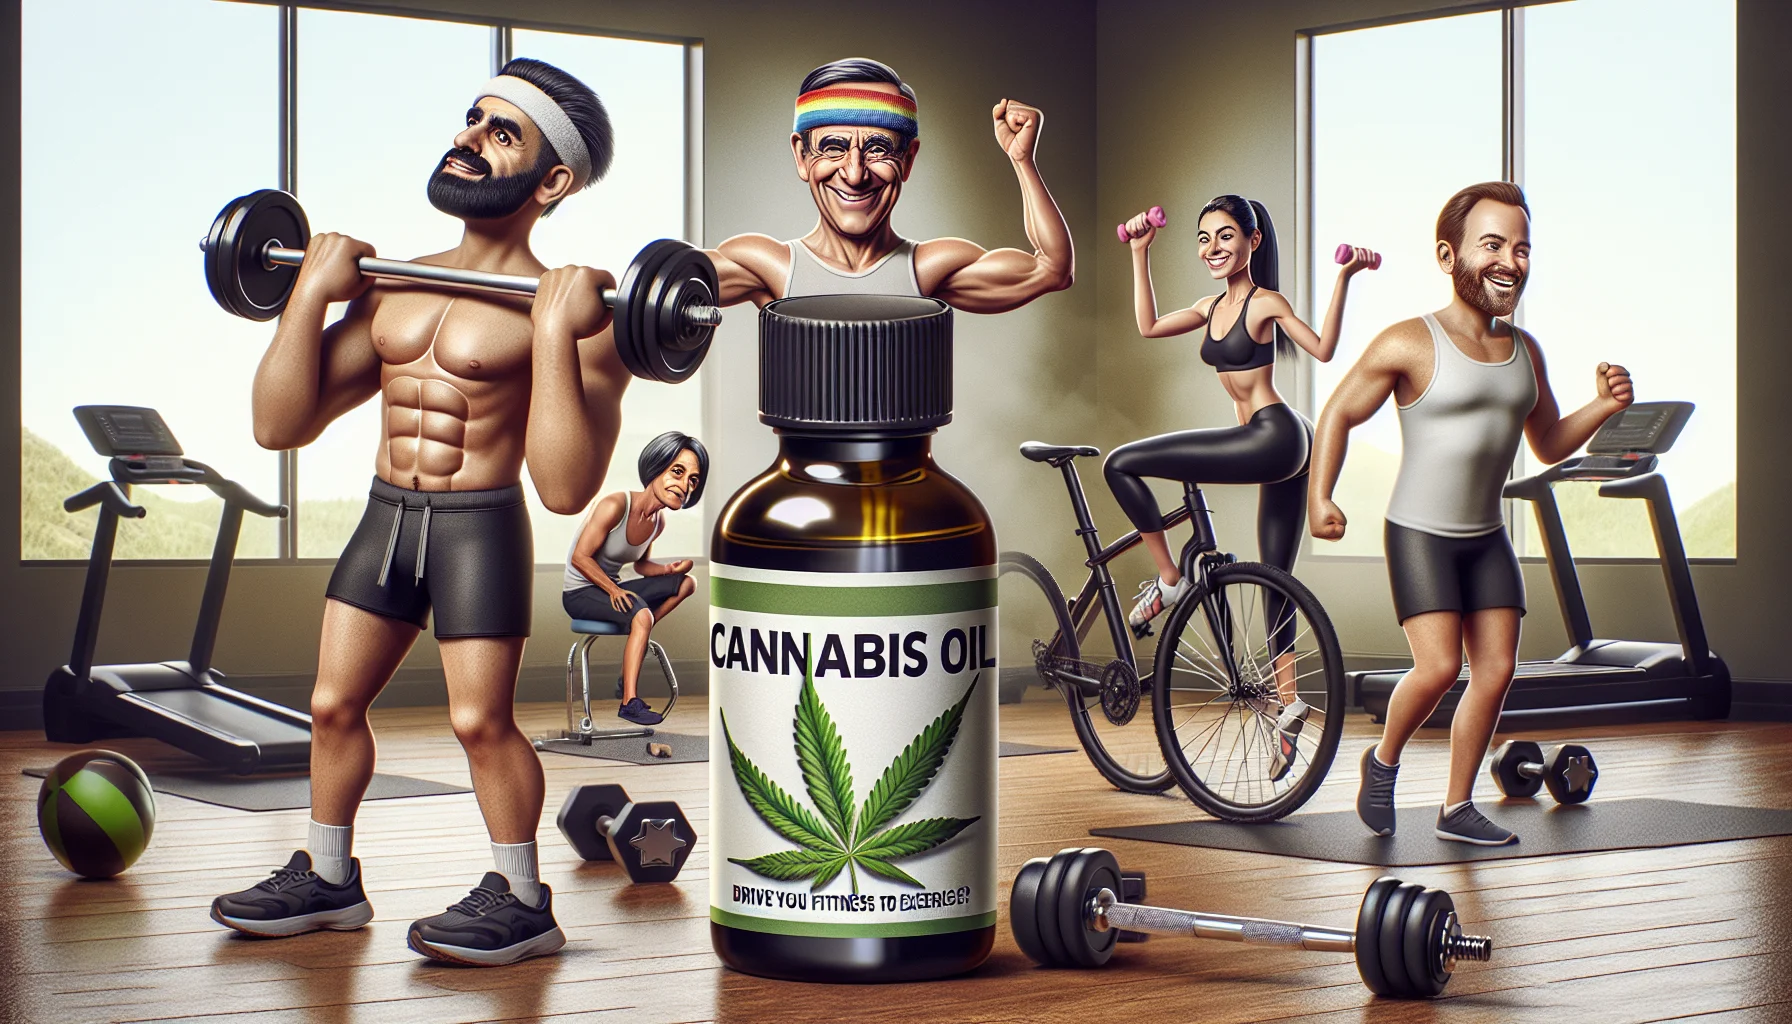 Generate an amusing and insightful image that drive fitness enthusiasts to exercise. The central theme should be a bottle of cannabis oil with visible labeling that highlights its fitness advantages. Surround it with humorous caricatures of people – a strong black gym-goer lifting heavy weights, a determined Hispanic jogger with a sweatband, a focused Middle-Eastern yogi performing a pose, and an energetic Caucasian cyclist. They should all exhibit joyful expressions, attesting to the positive effects of the product. Let the background subtly hint at a typical gym setup – with dumbbells, yoga mats, cycles, and treadmills.